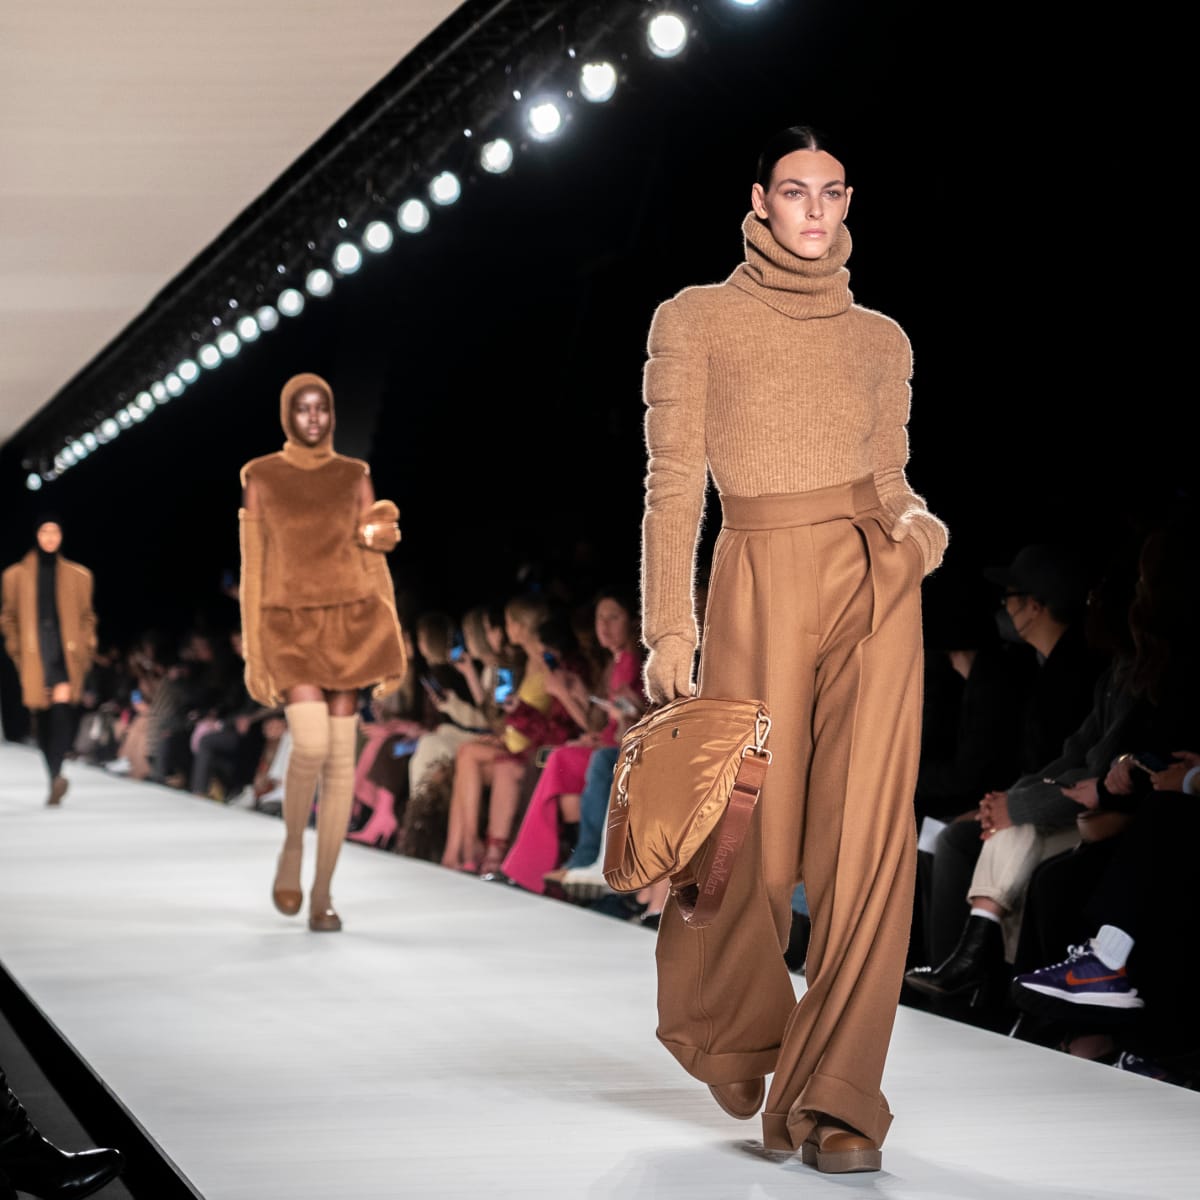 Ten top trends from the winter 2022-23 womenswear shows